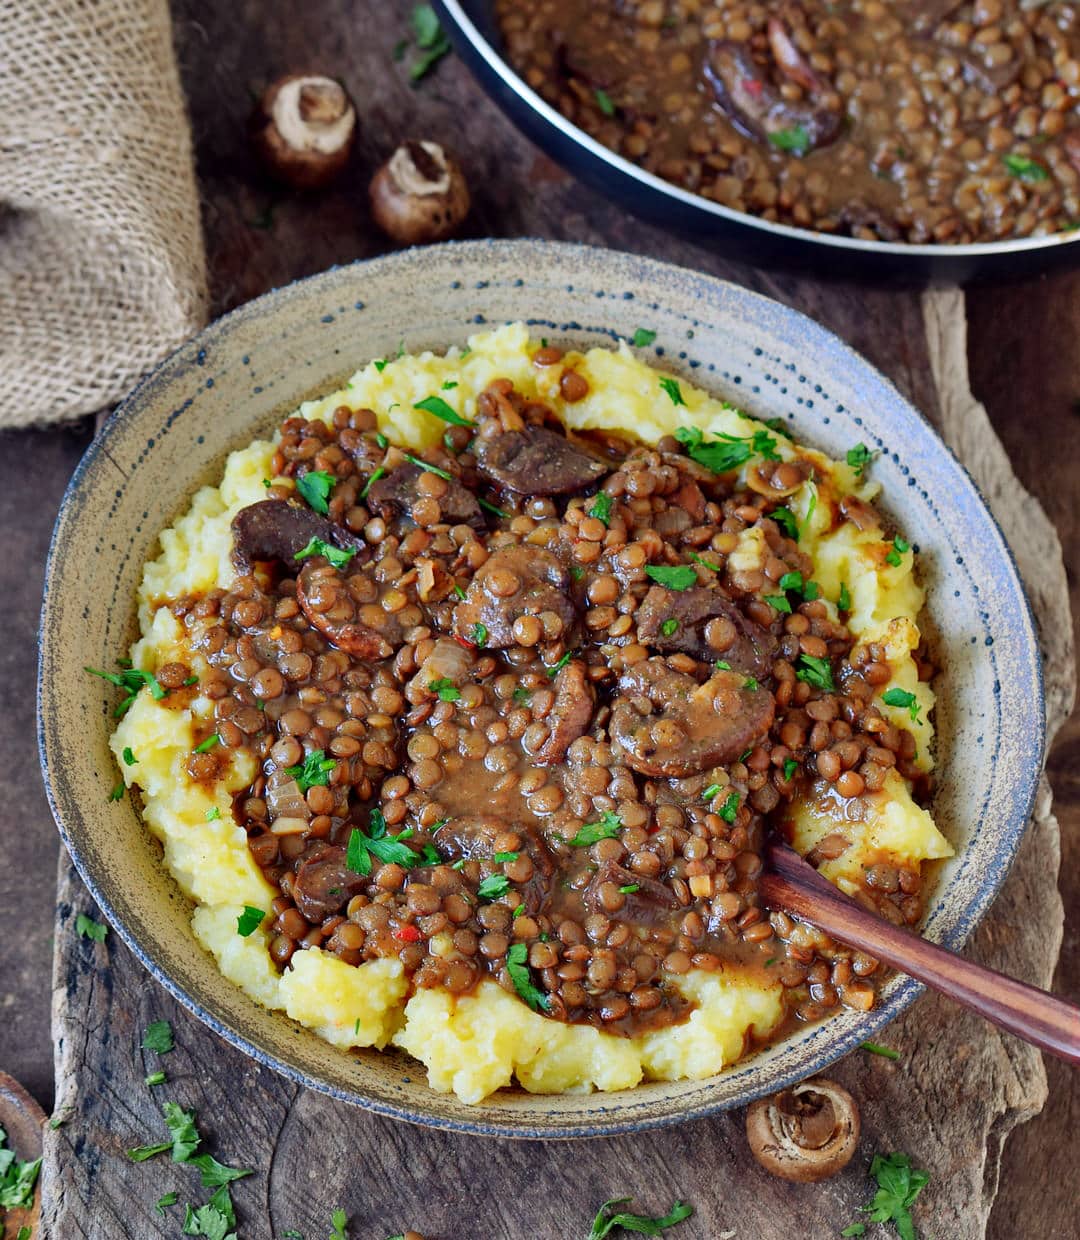 Easy lentil stew with mashed potatoes and mushrooms in a bowl